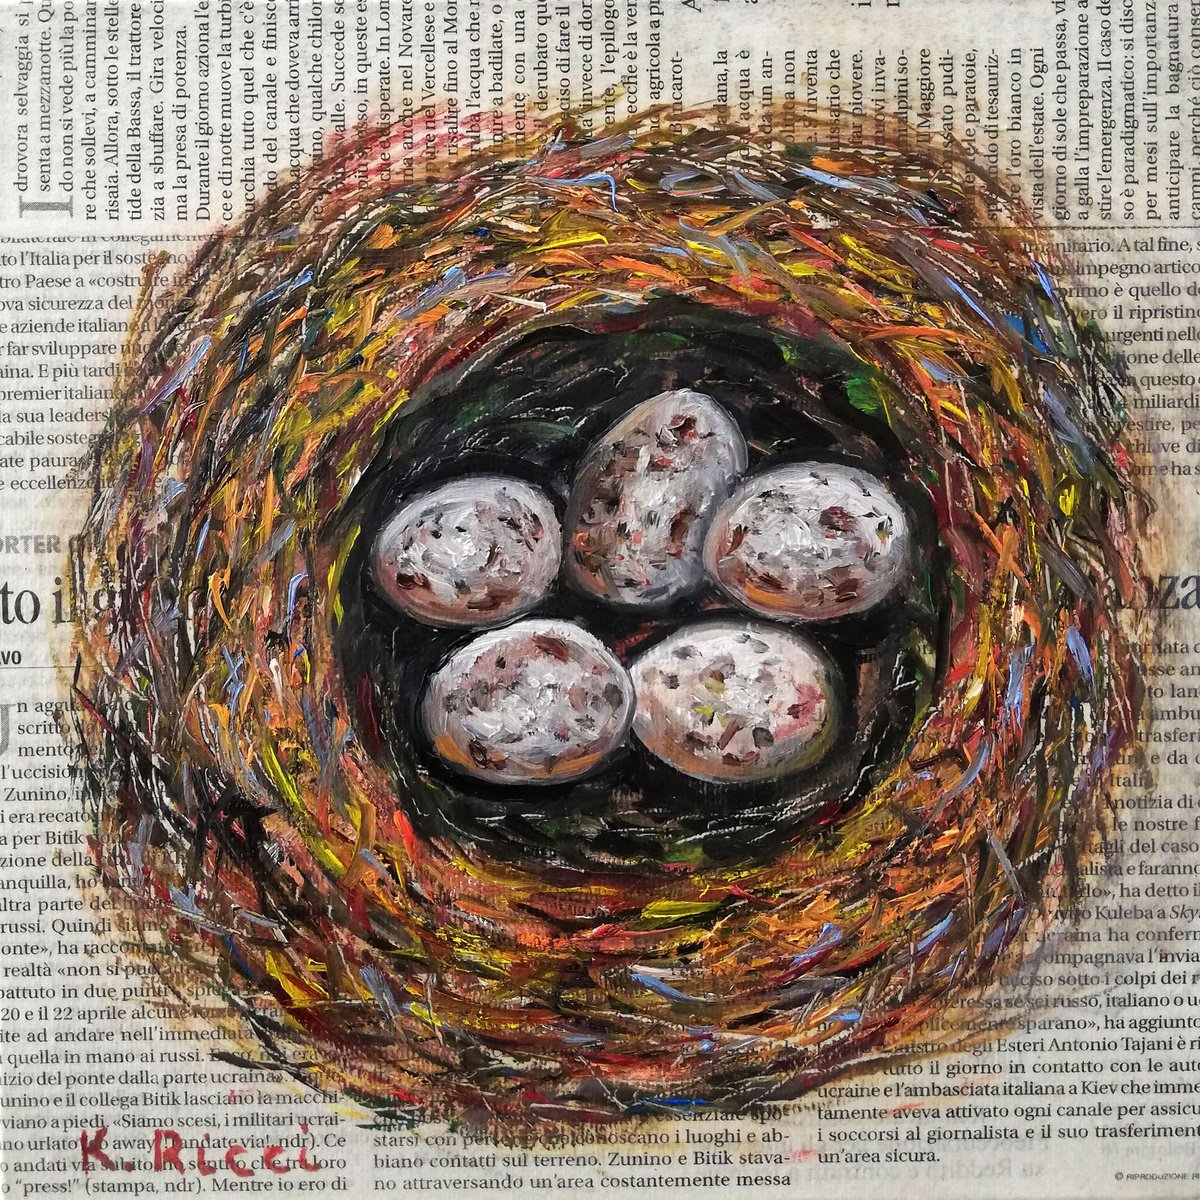 Nest on Newspaper Original Oil on Canvas Board Painting 8 by 8 inches (20x20 cm) by Katia Ricci